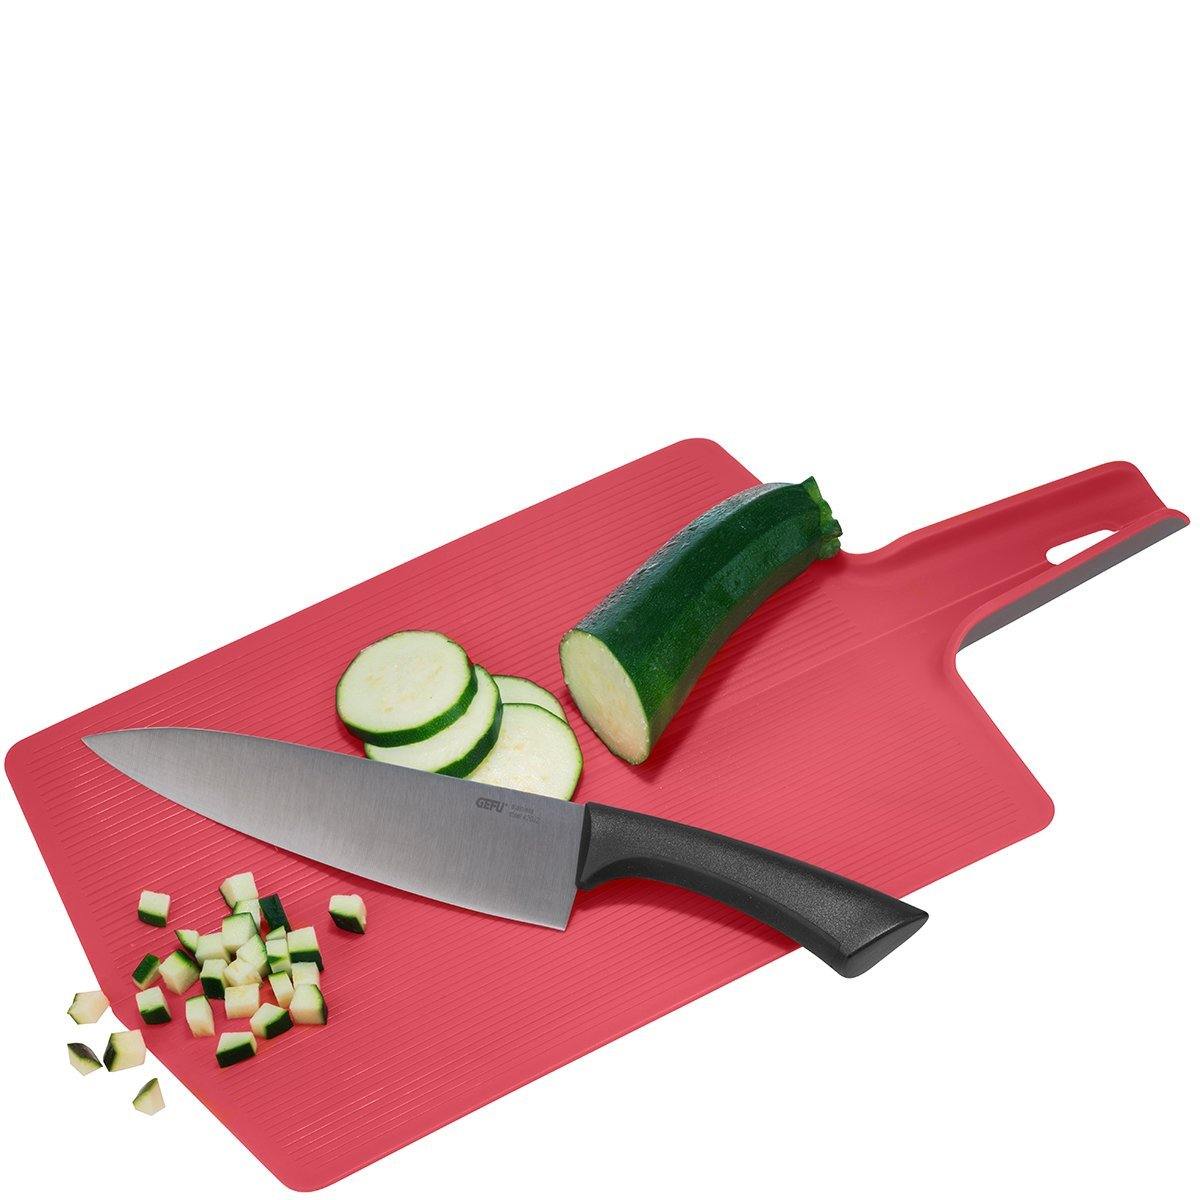 GEFU Folding Chopping Board Lavos, Raspberry Red - Whole and All